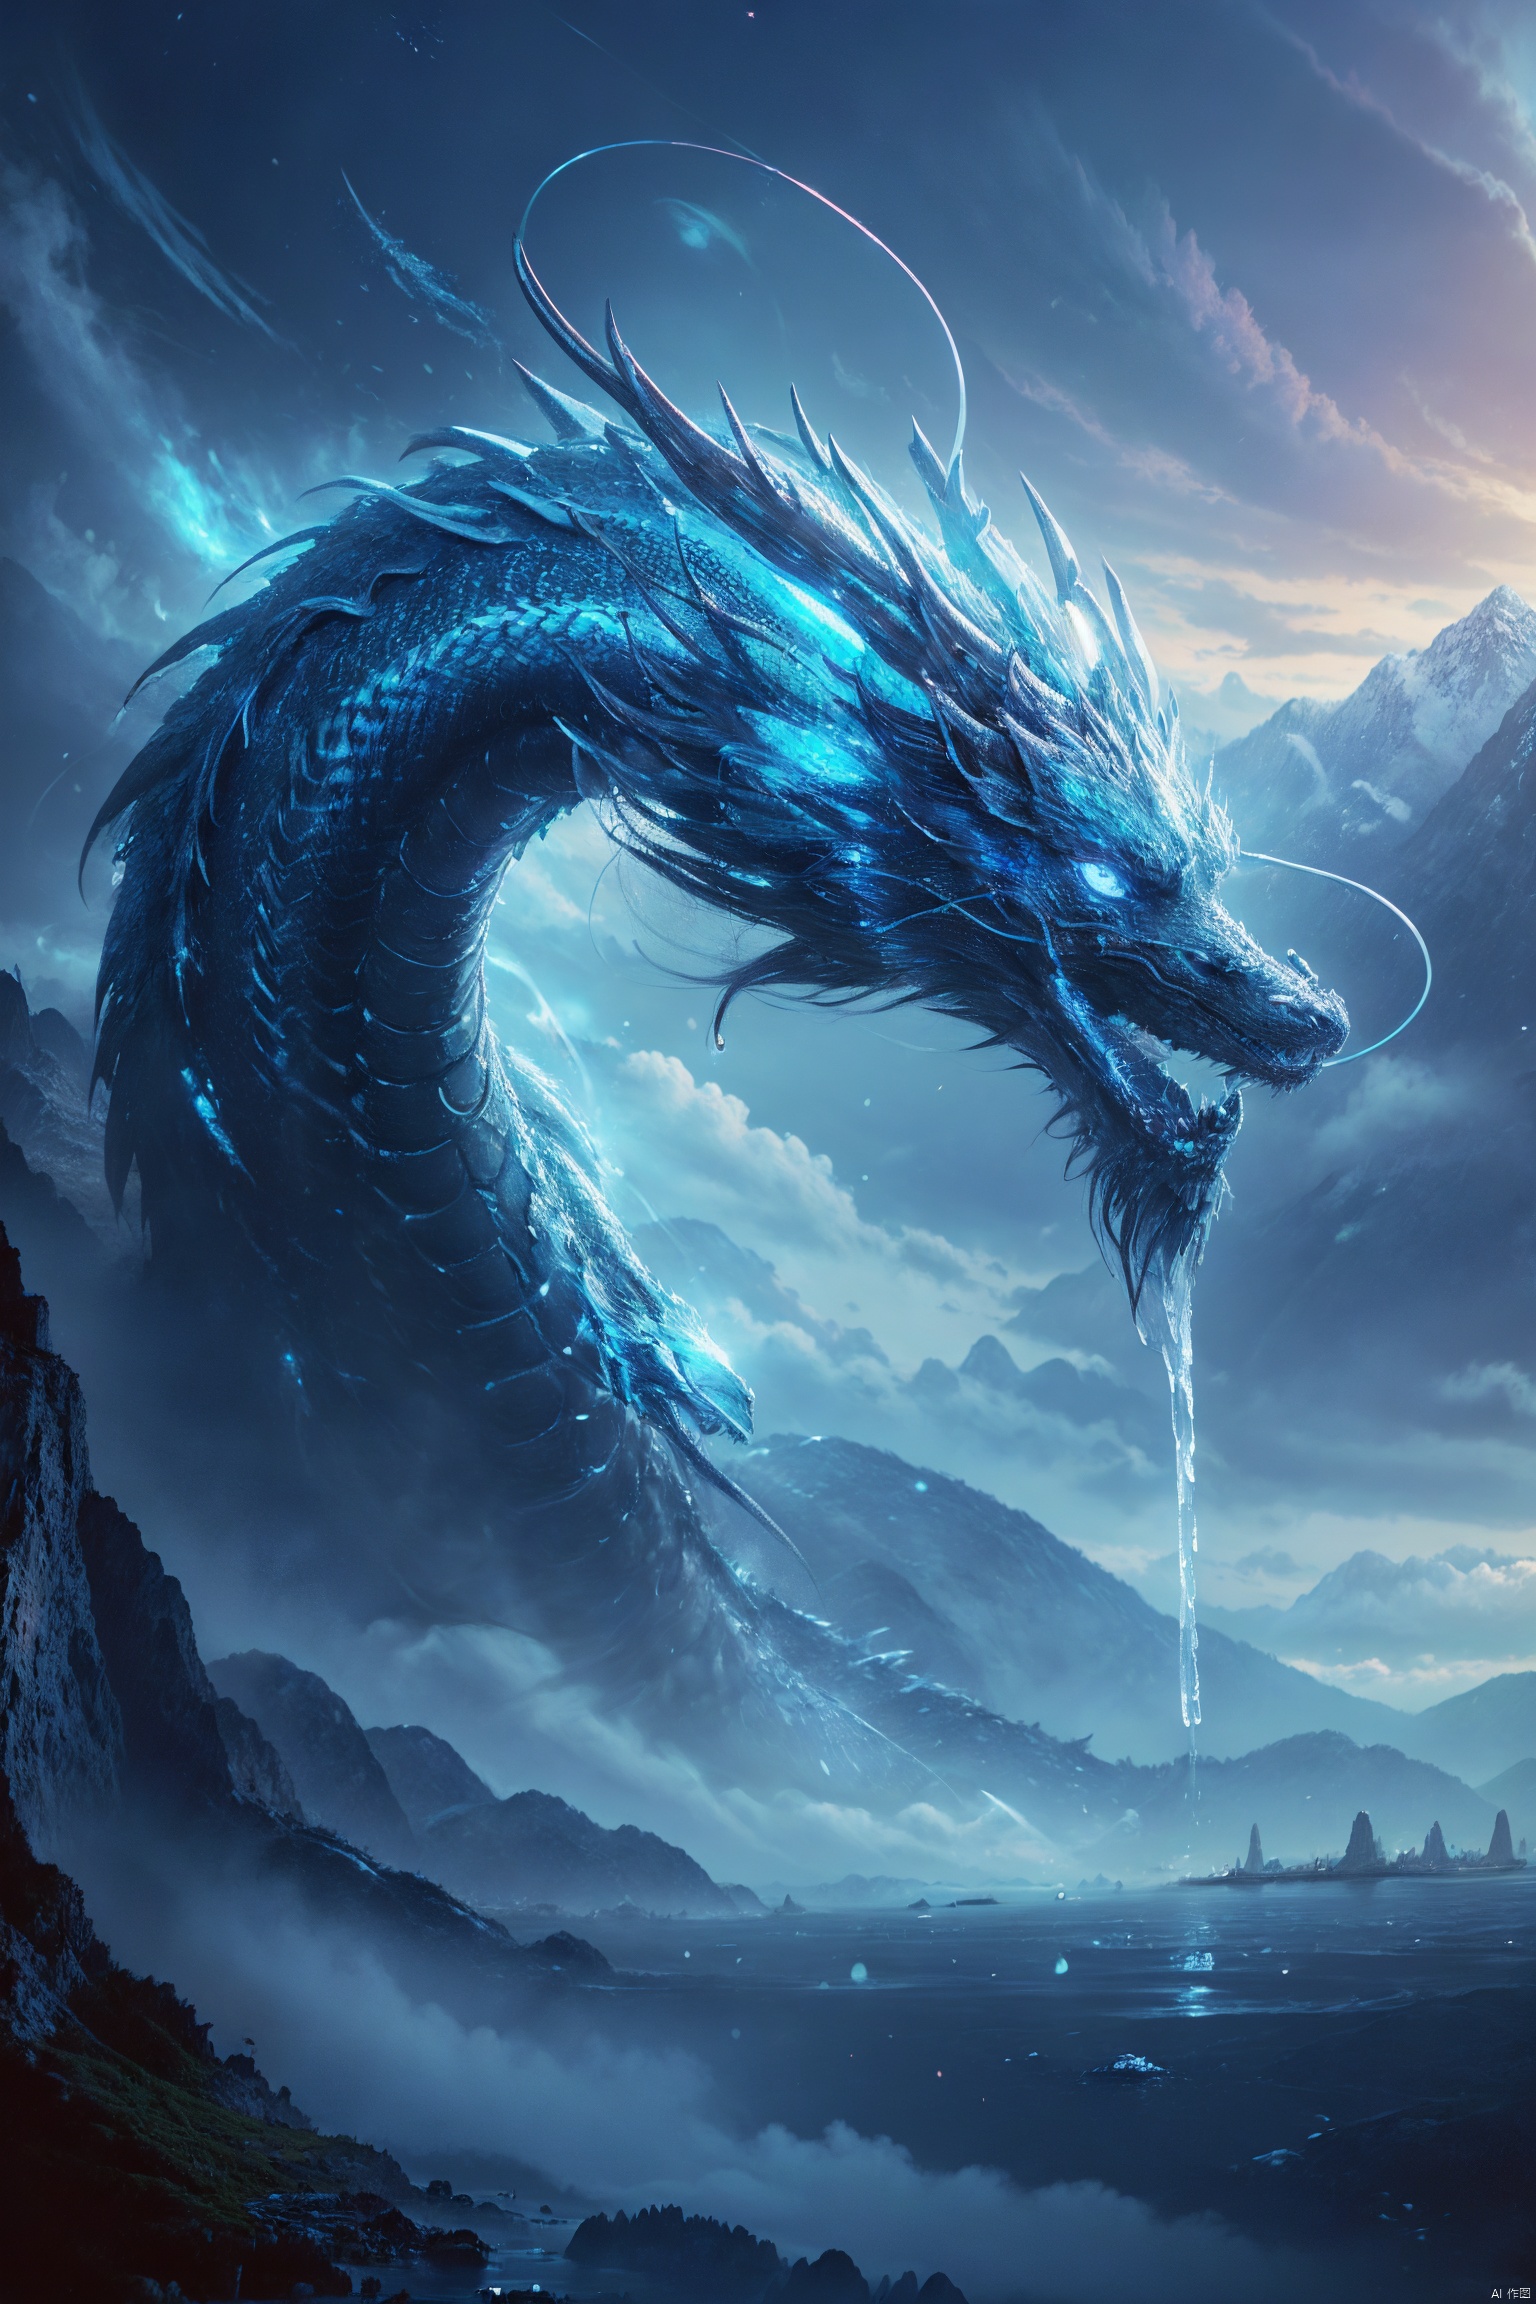  1 dragon,linkedragom,night,glowing,Close-up of face, faucet, staring at the audience,Mountains, oceans, clouds